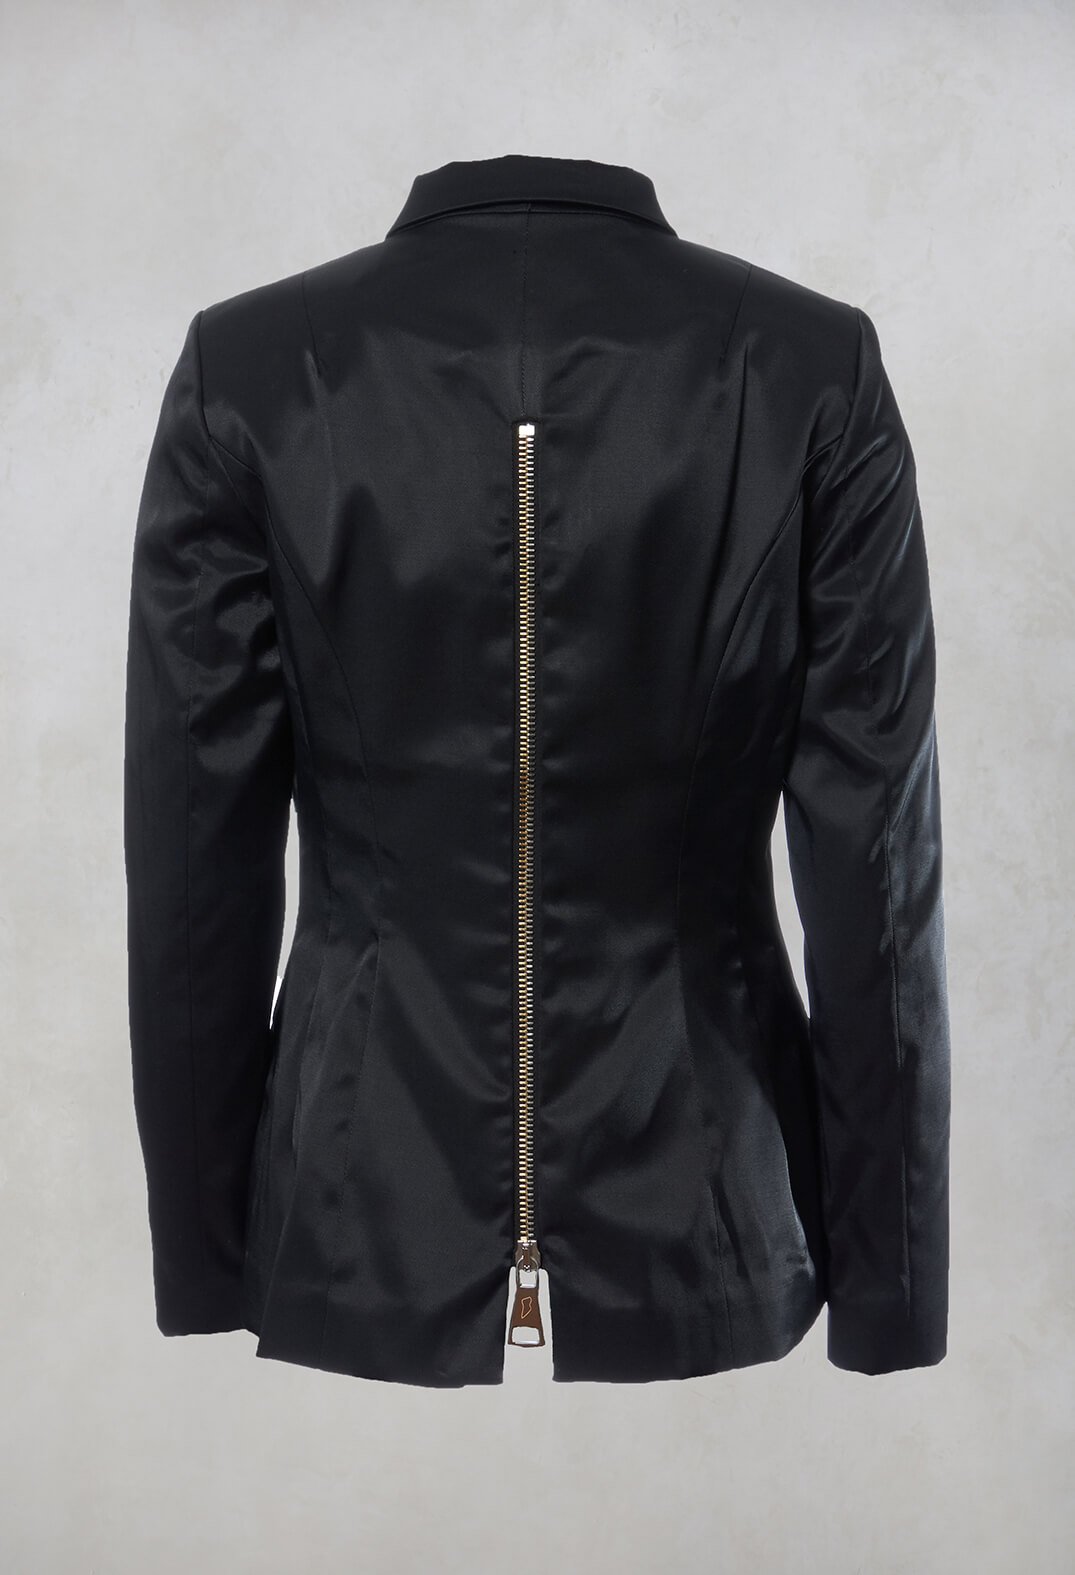 Zipped Jacket in Intrigue